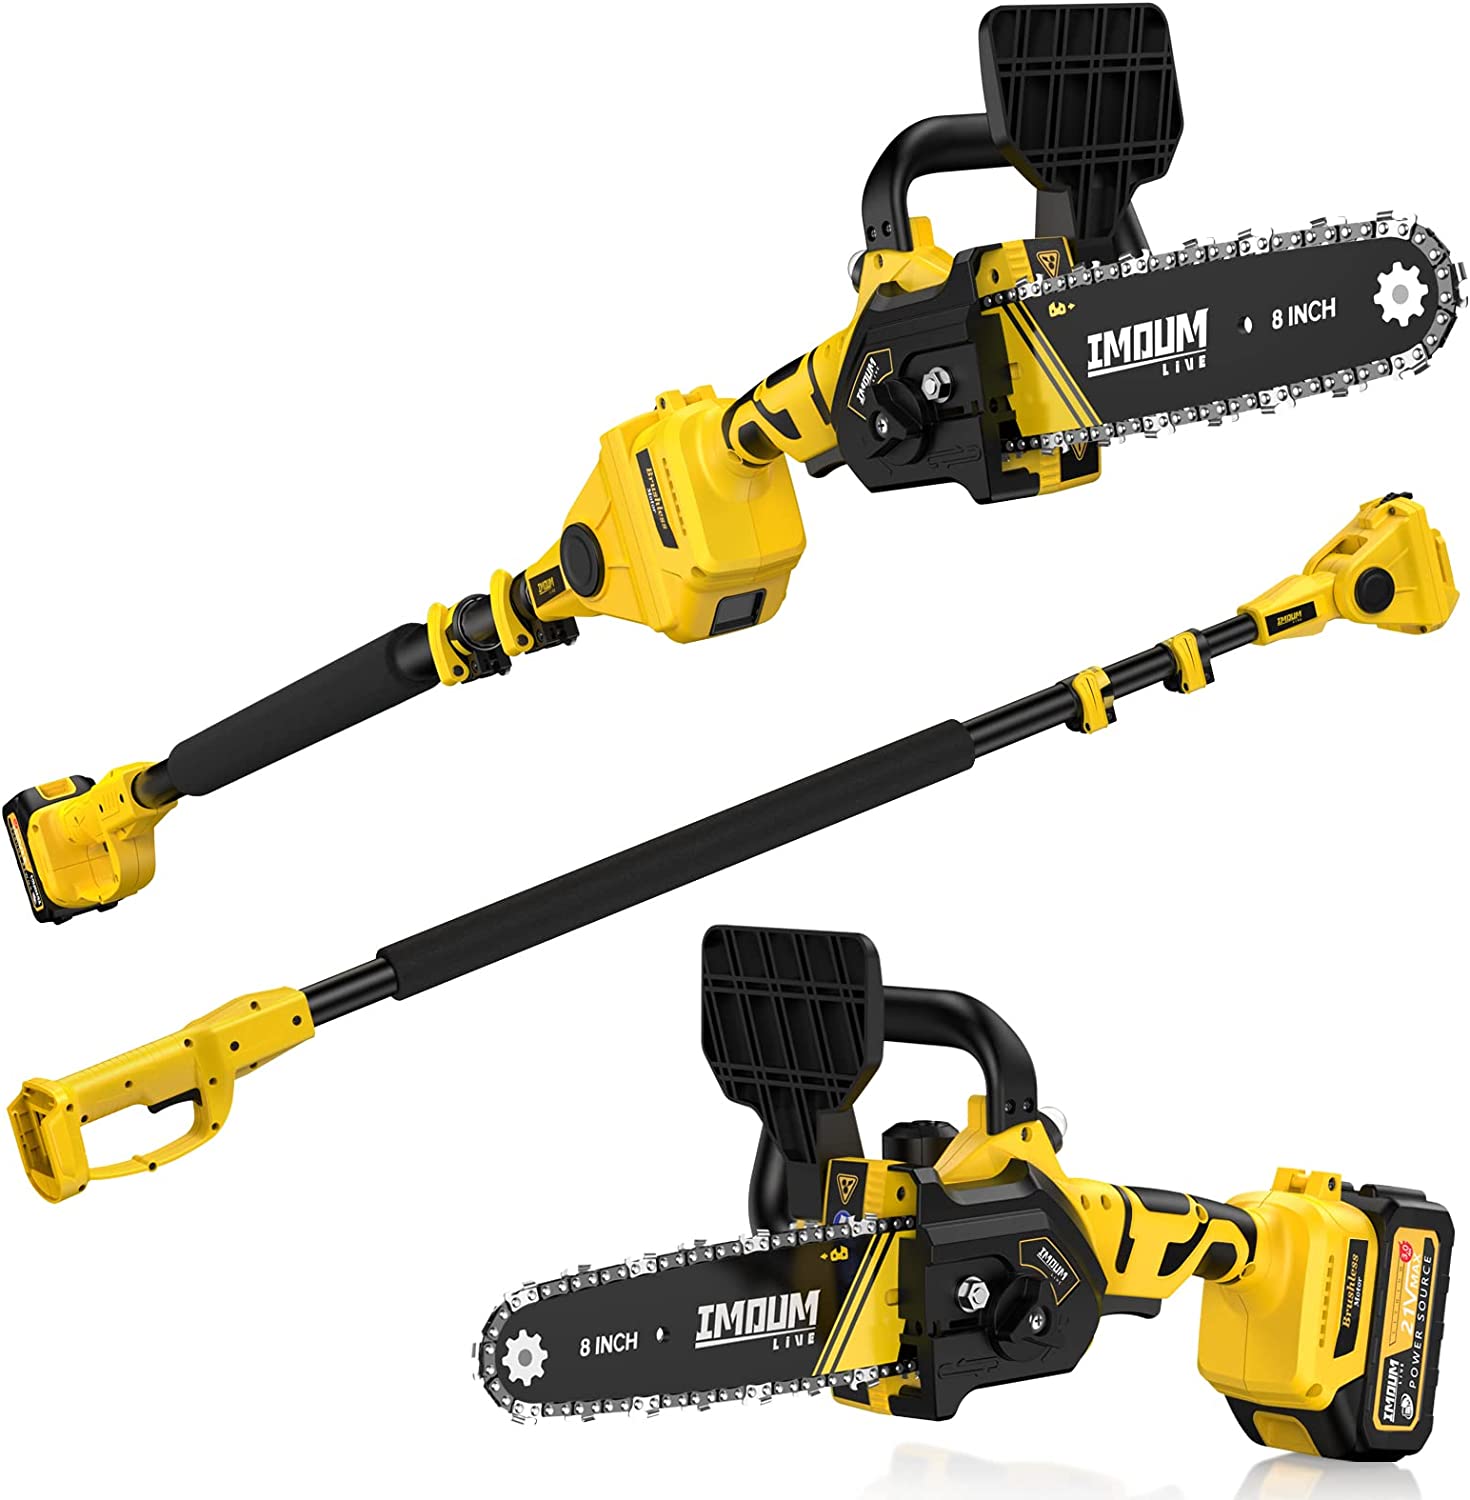 IMOUM 2-in-1 Brushless Electric Pole Saw & 8 Inch Mini Chainsaw - Imoum